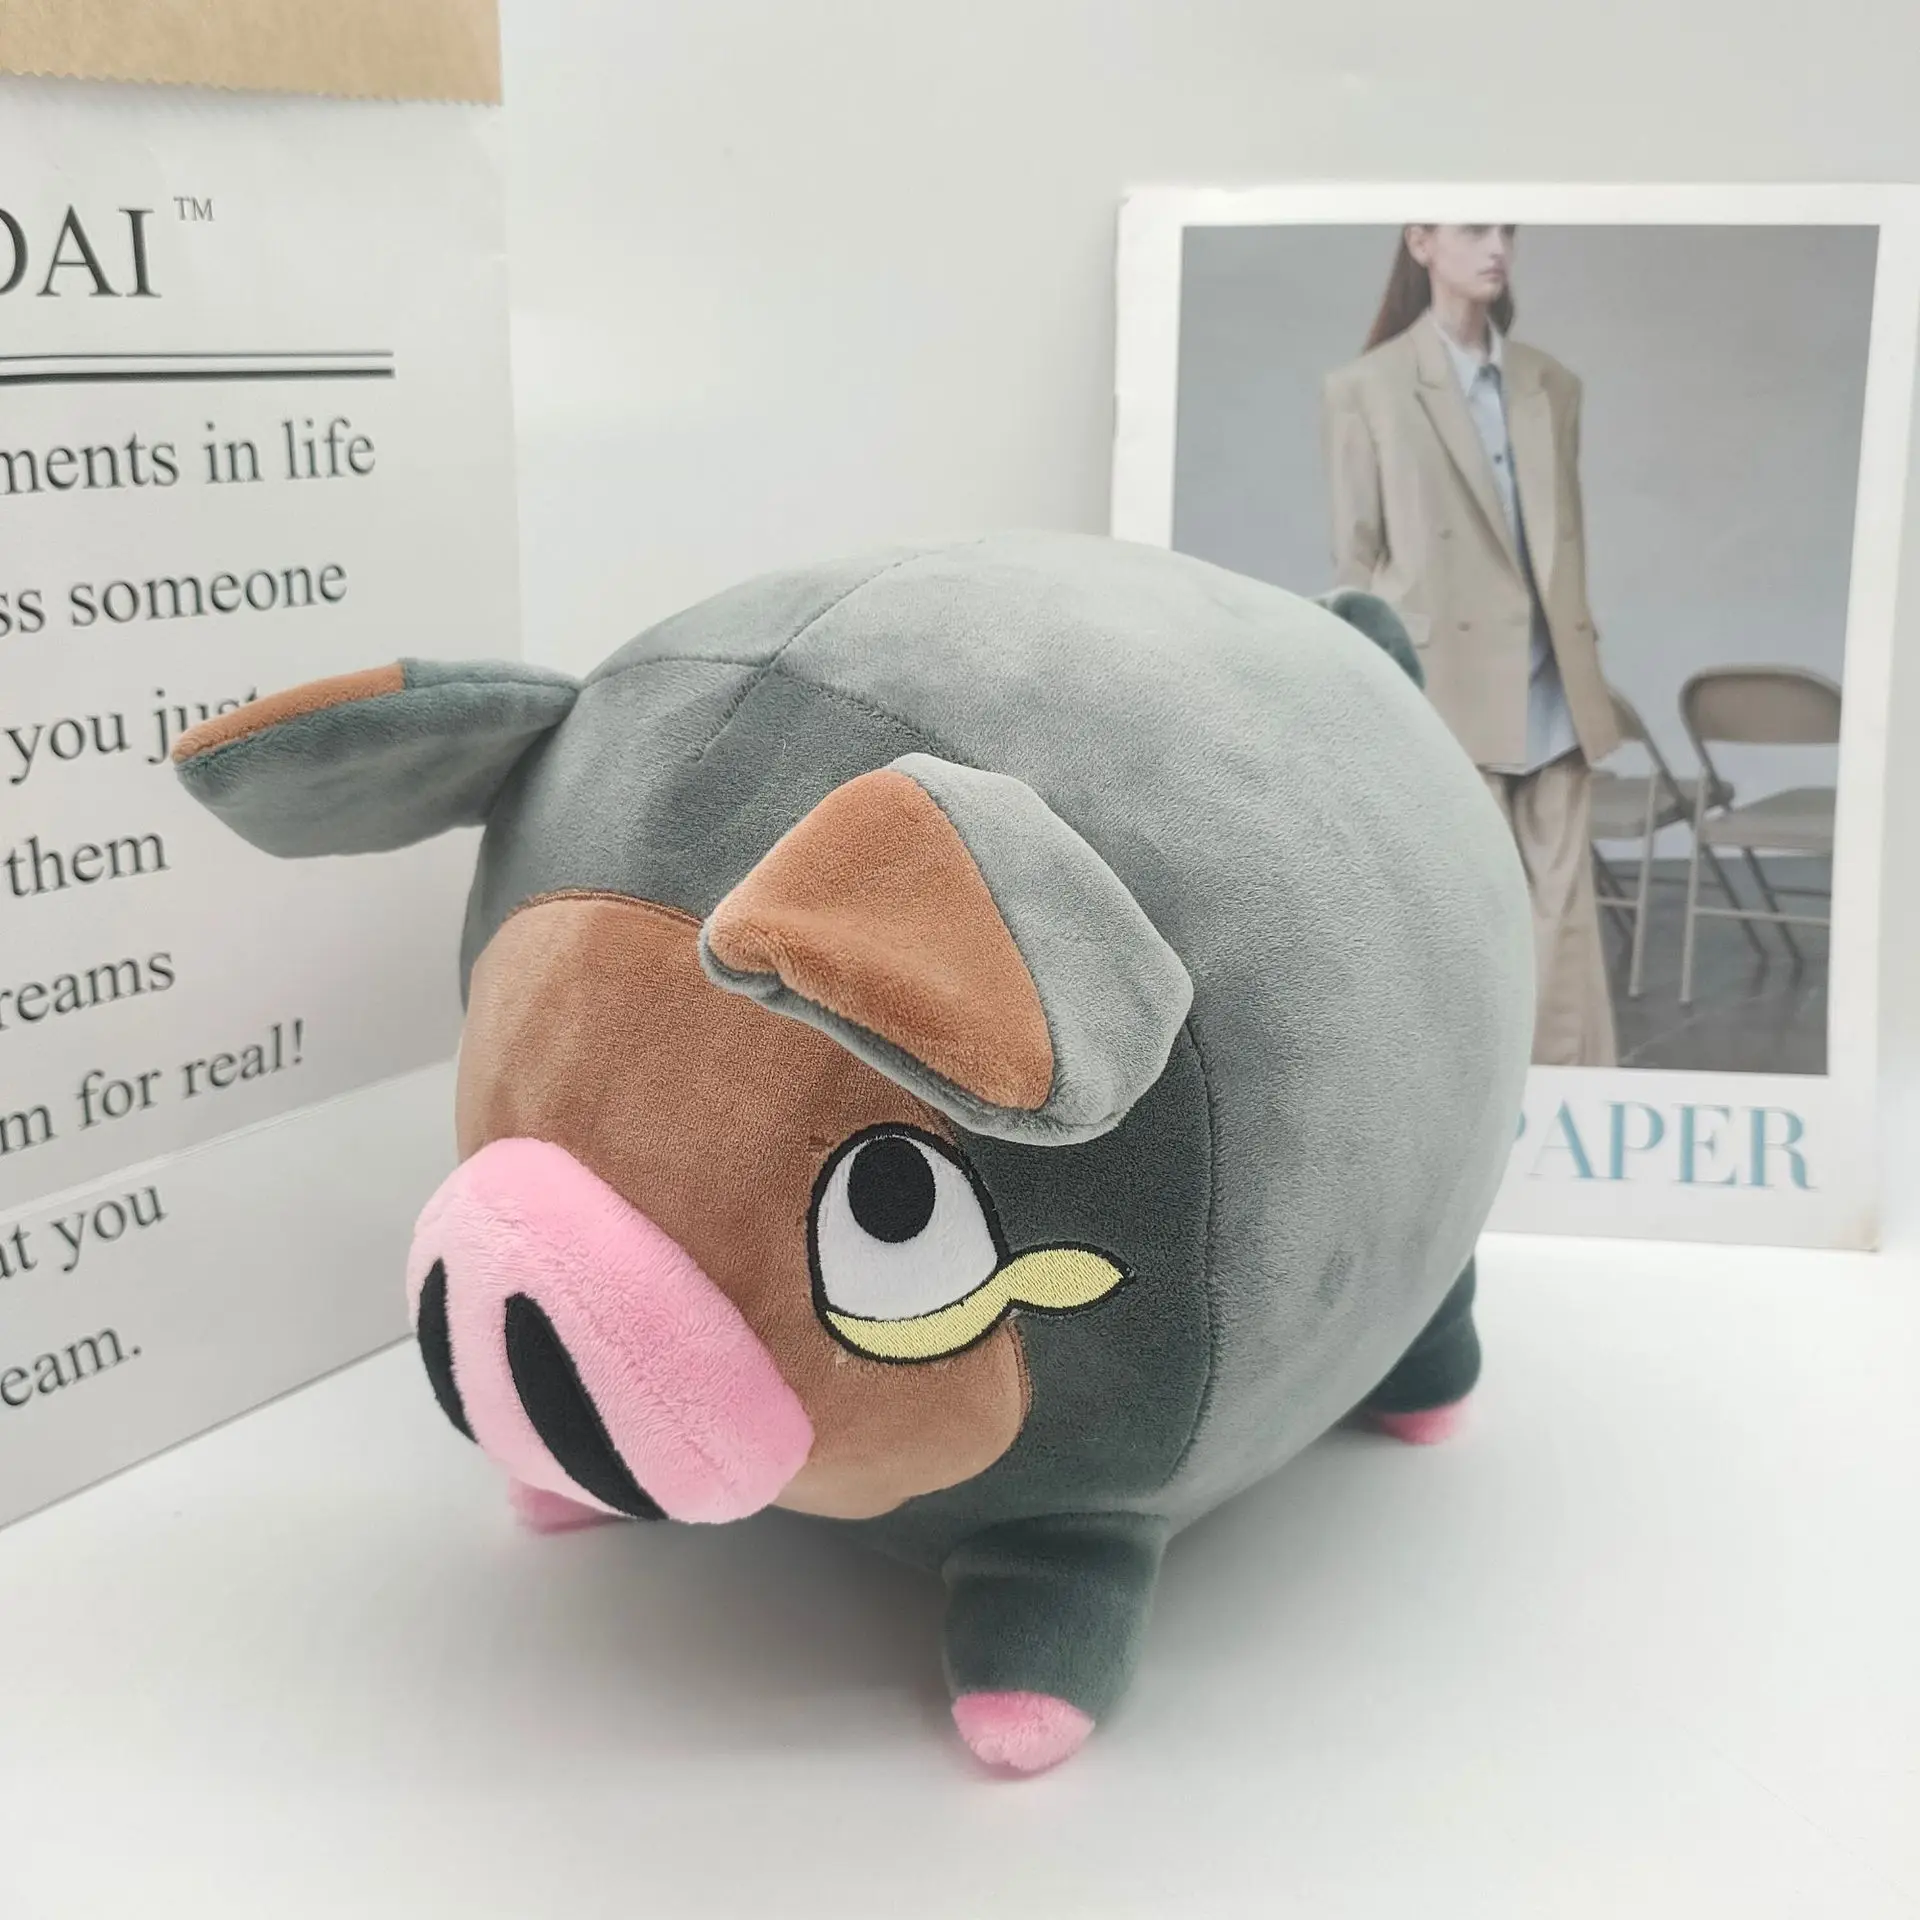 

New Pokemon Grey Pig Plush Toys Anime Characters Cartoon Shapes Children's Birthday Gifts for Boyfriends